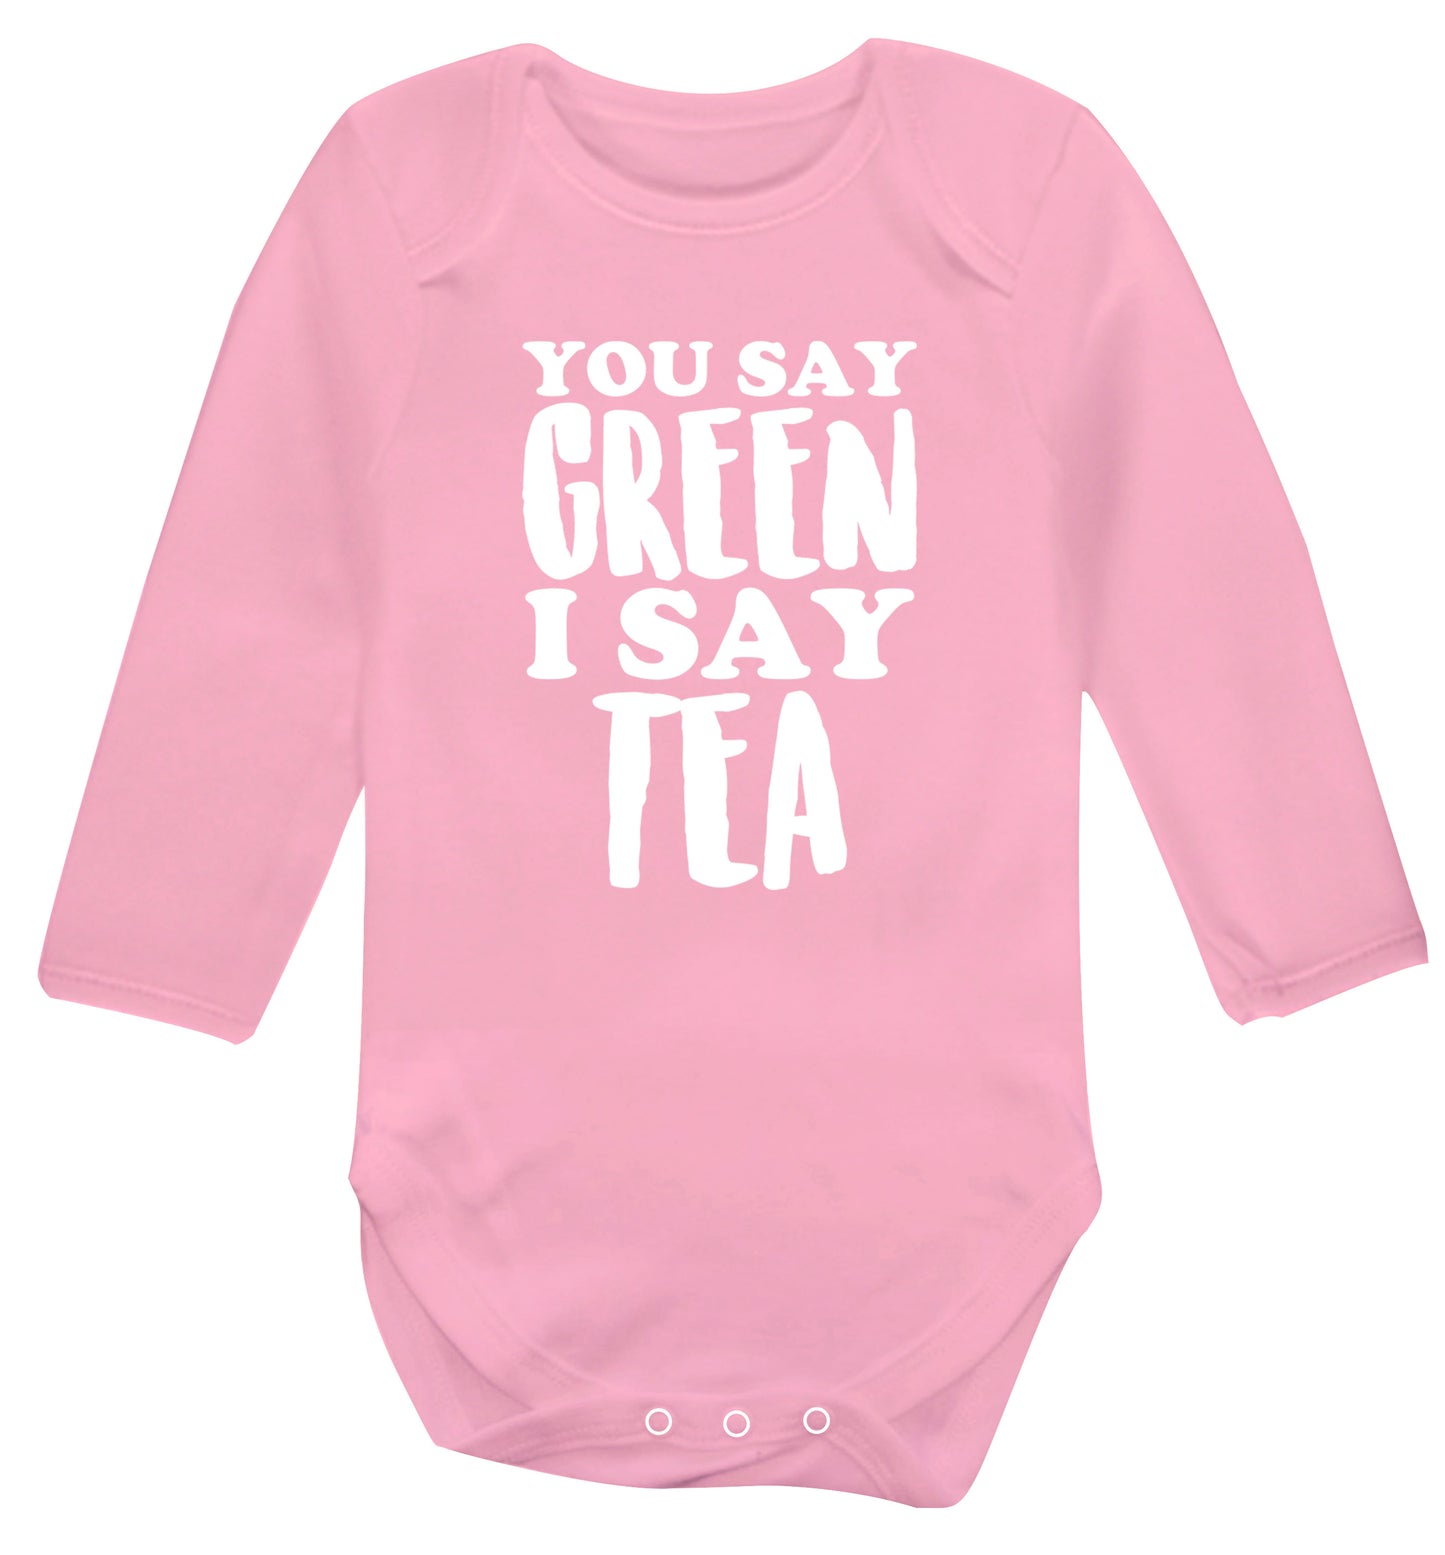 You say green I say tea! Baby Vest long sleeved pale pink 6-12 months